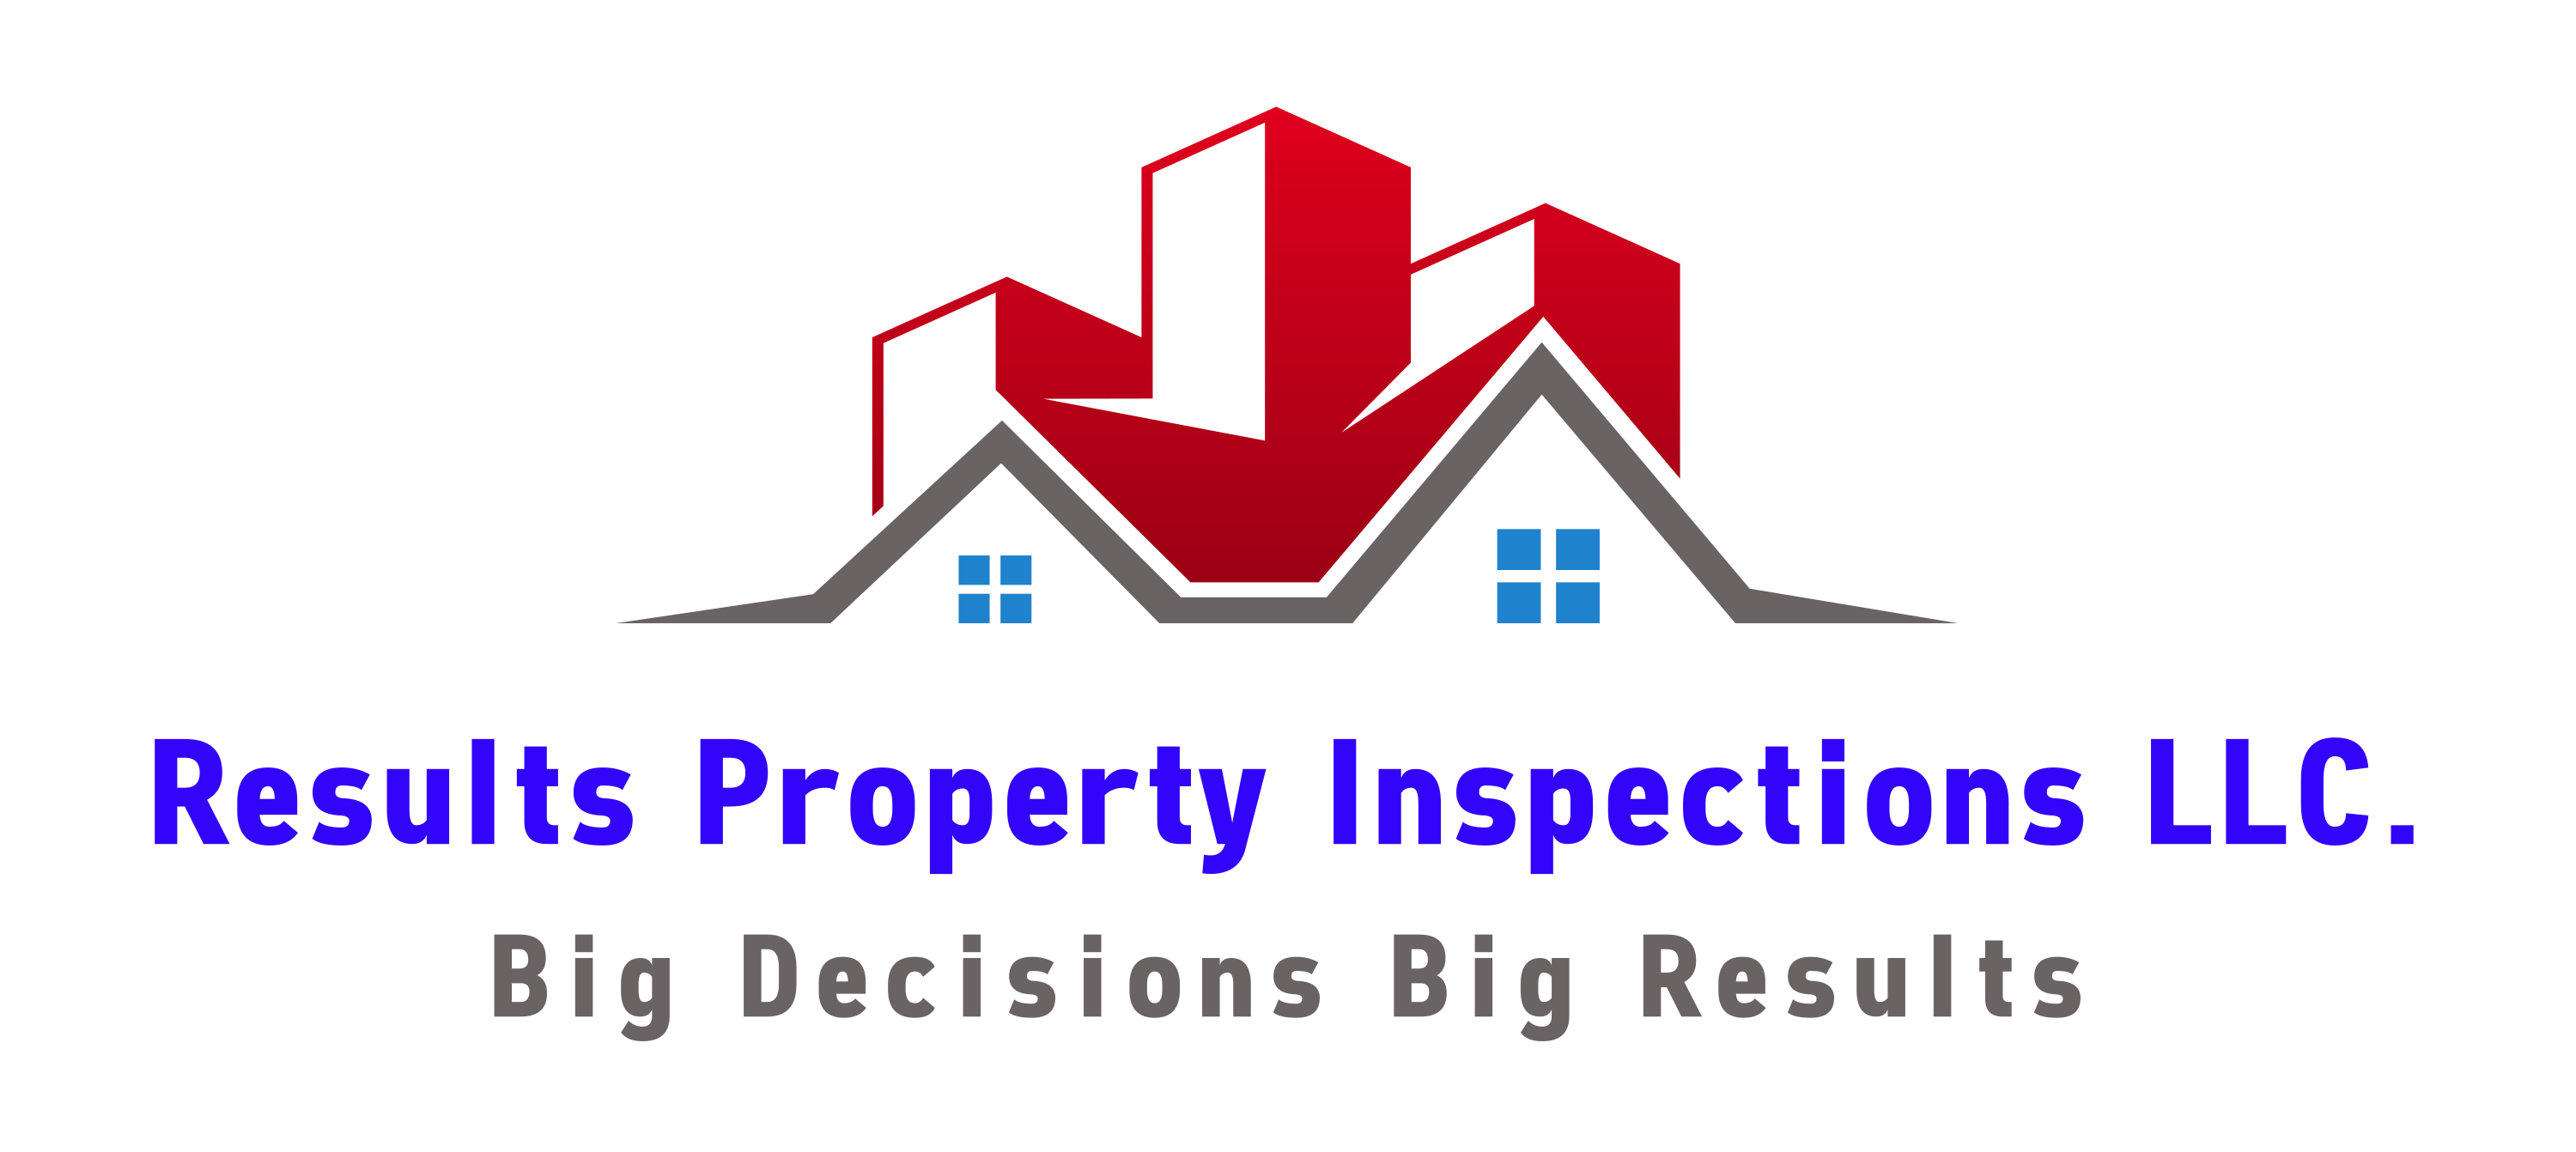 Results Property Inspections, LLC Logo